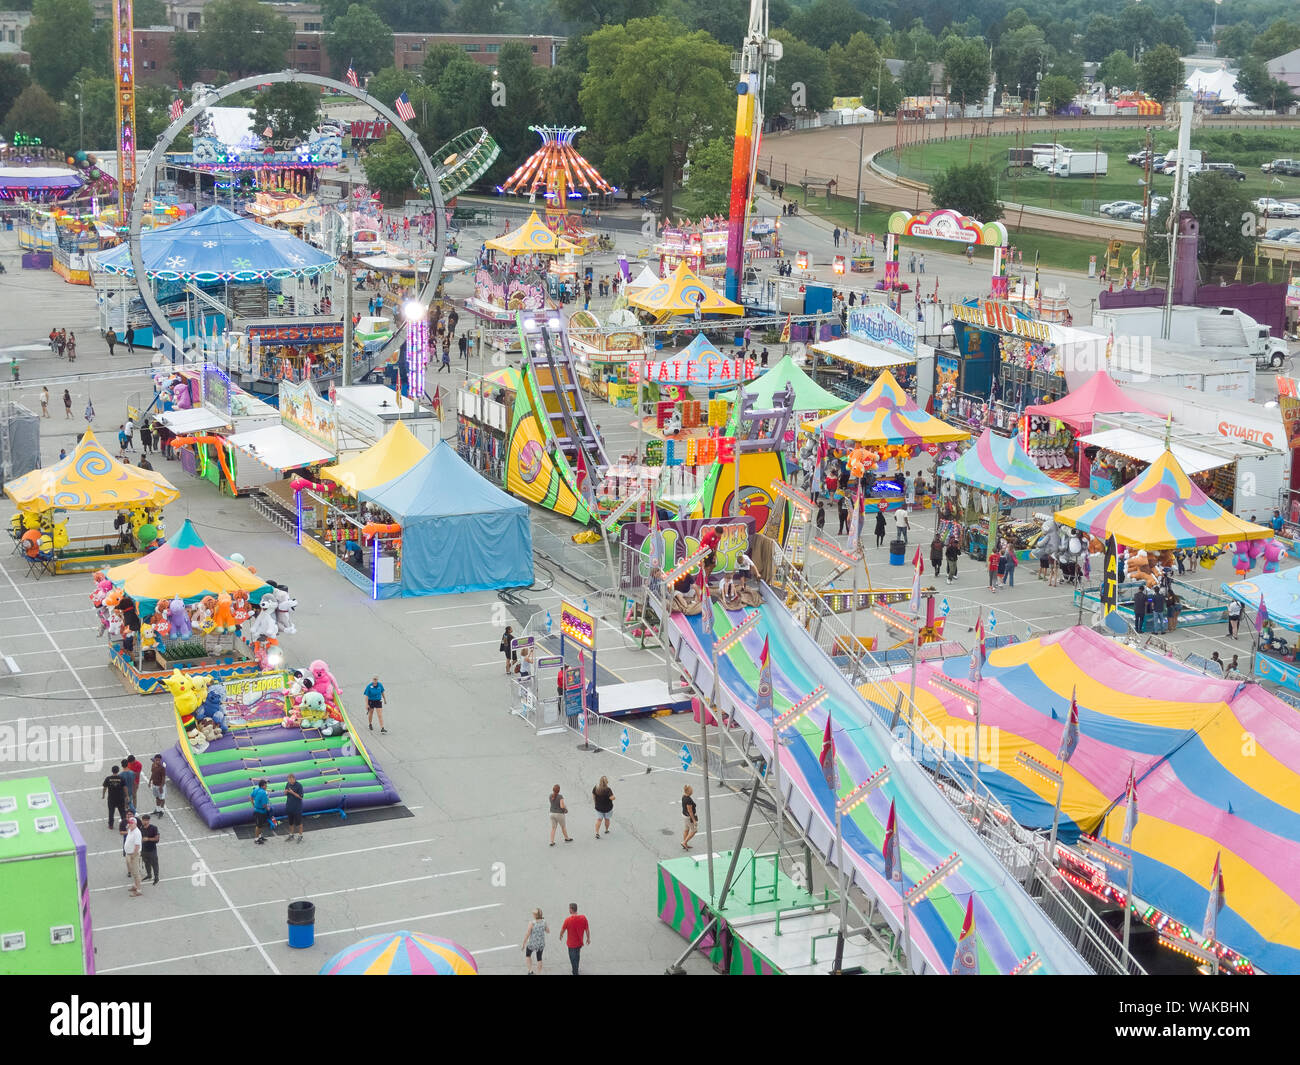 USA, Indiana, Indianapolis. Overview of midway on fairgrounds. Credit as: Wendy Kaveney / Jaynes Gallery / DanitaDelimont.com Stock Photo